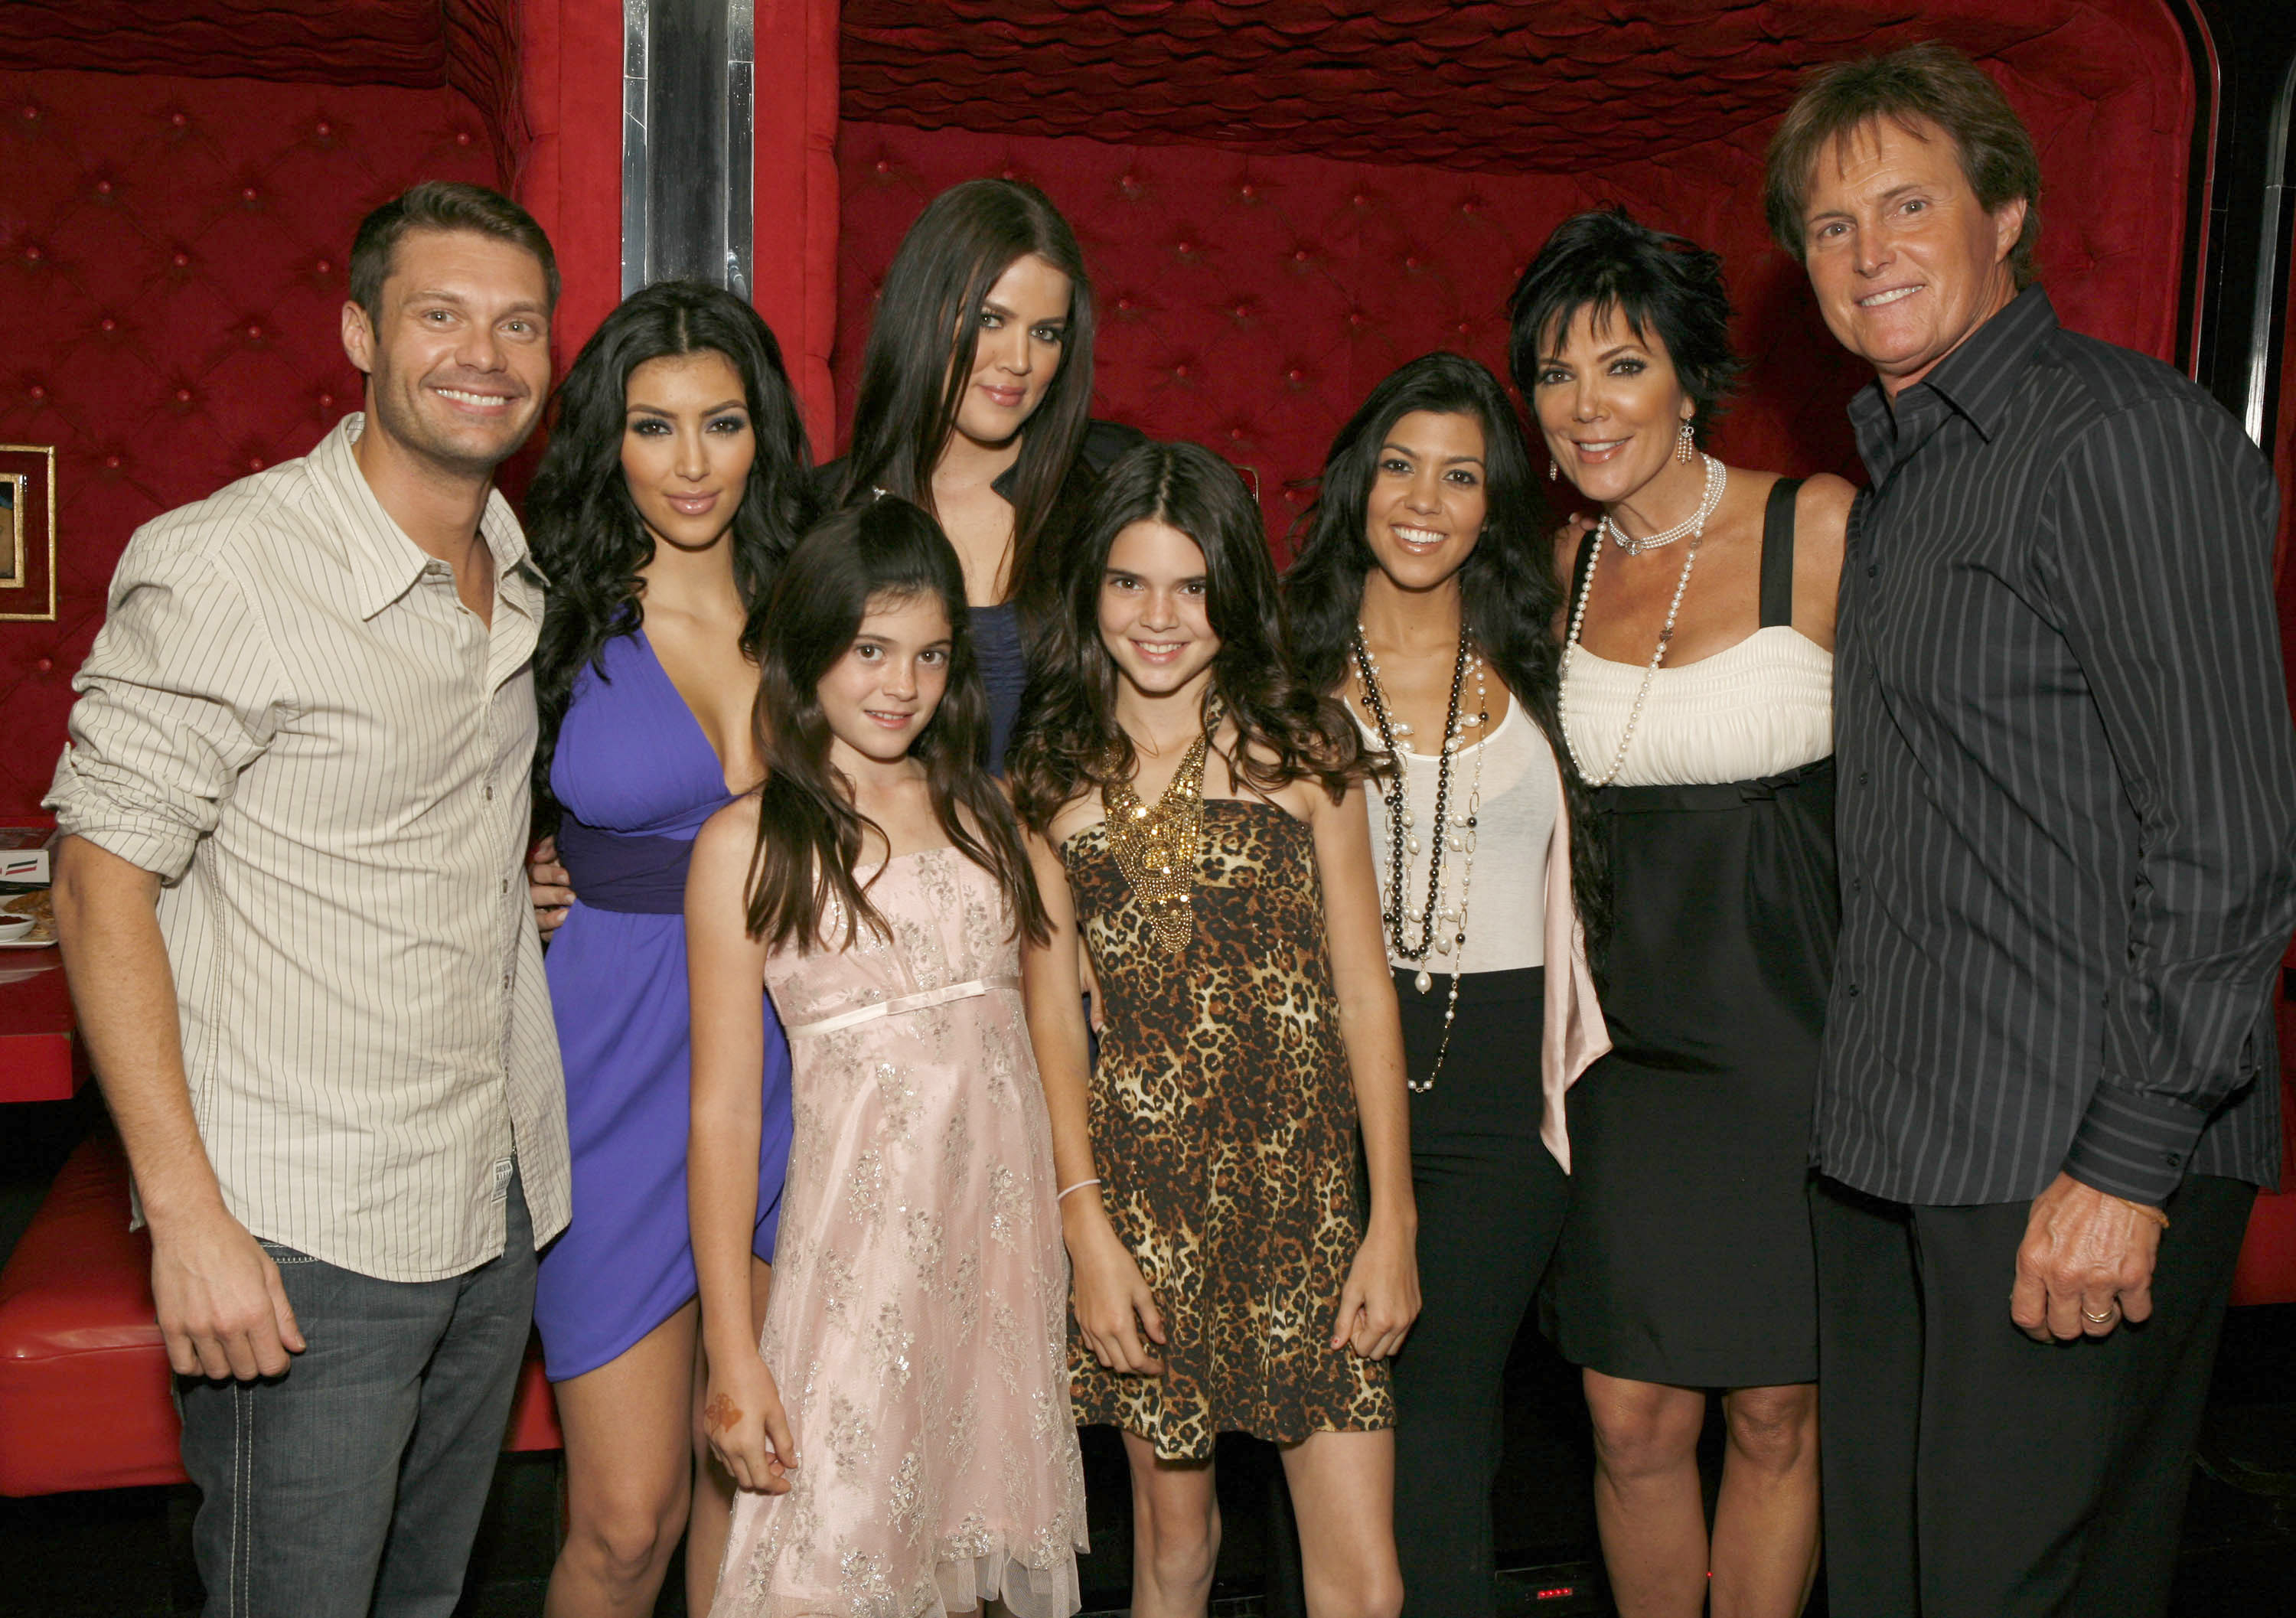 The family years ago with Ryan Seacrest